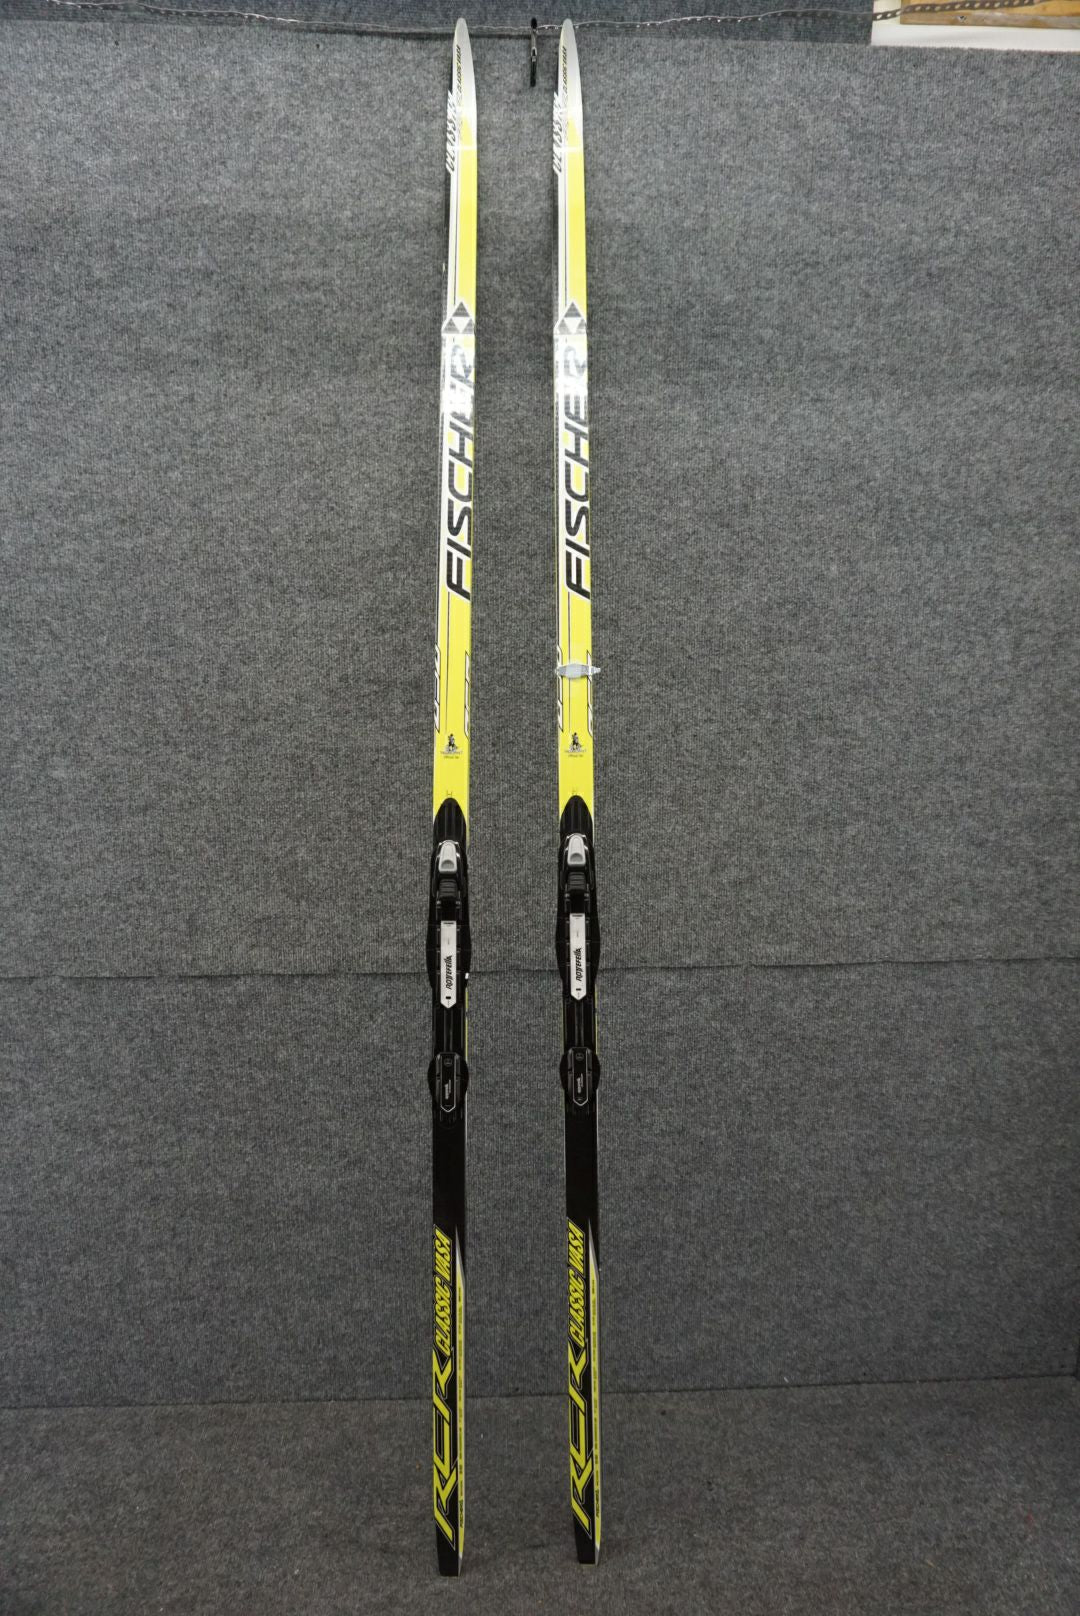 Fischer Length 207 cm/81.5" Cross Country Skis